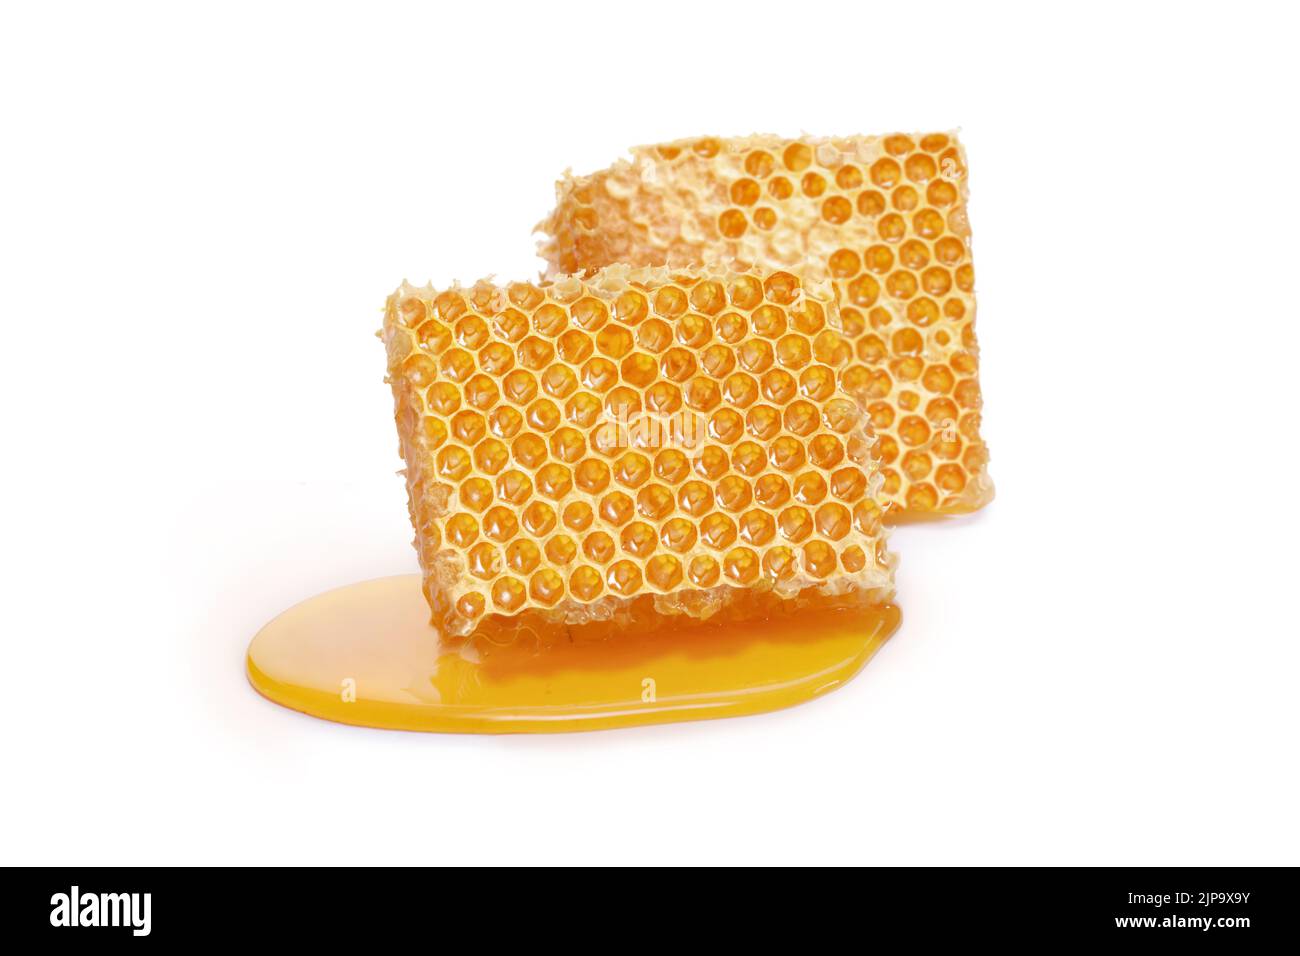 Pieces of a honeycomb with honey leaking around isolated on white background Stock Photo